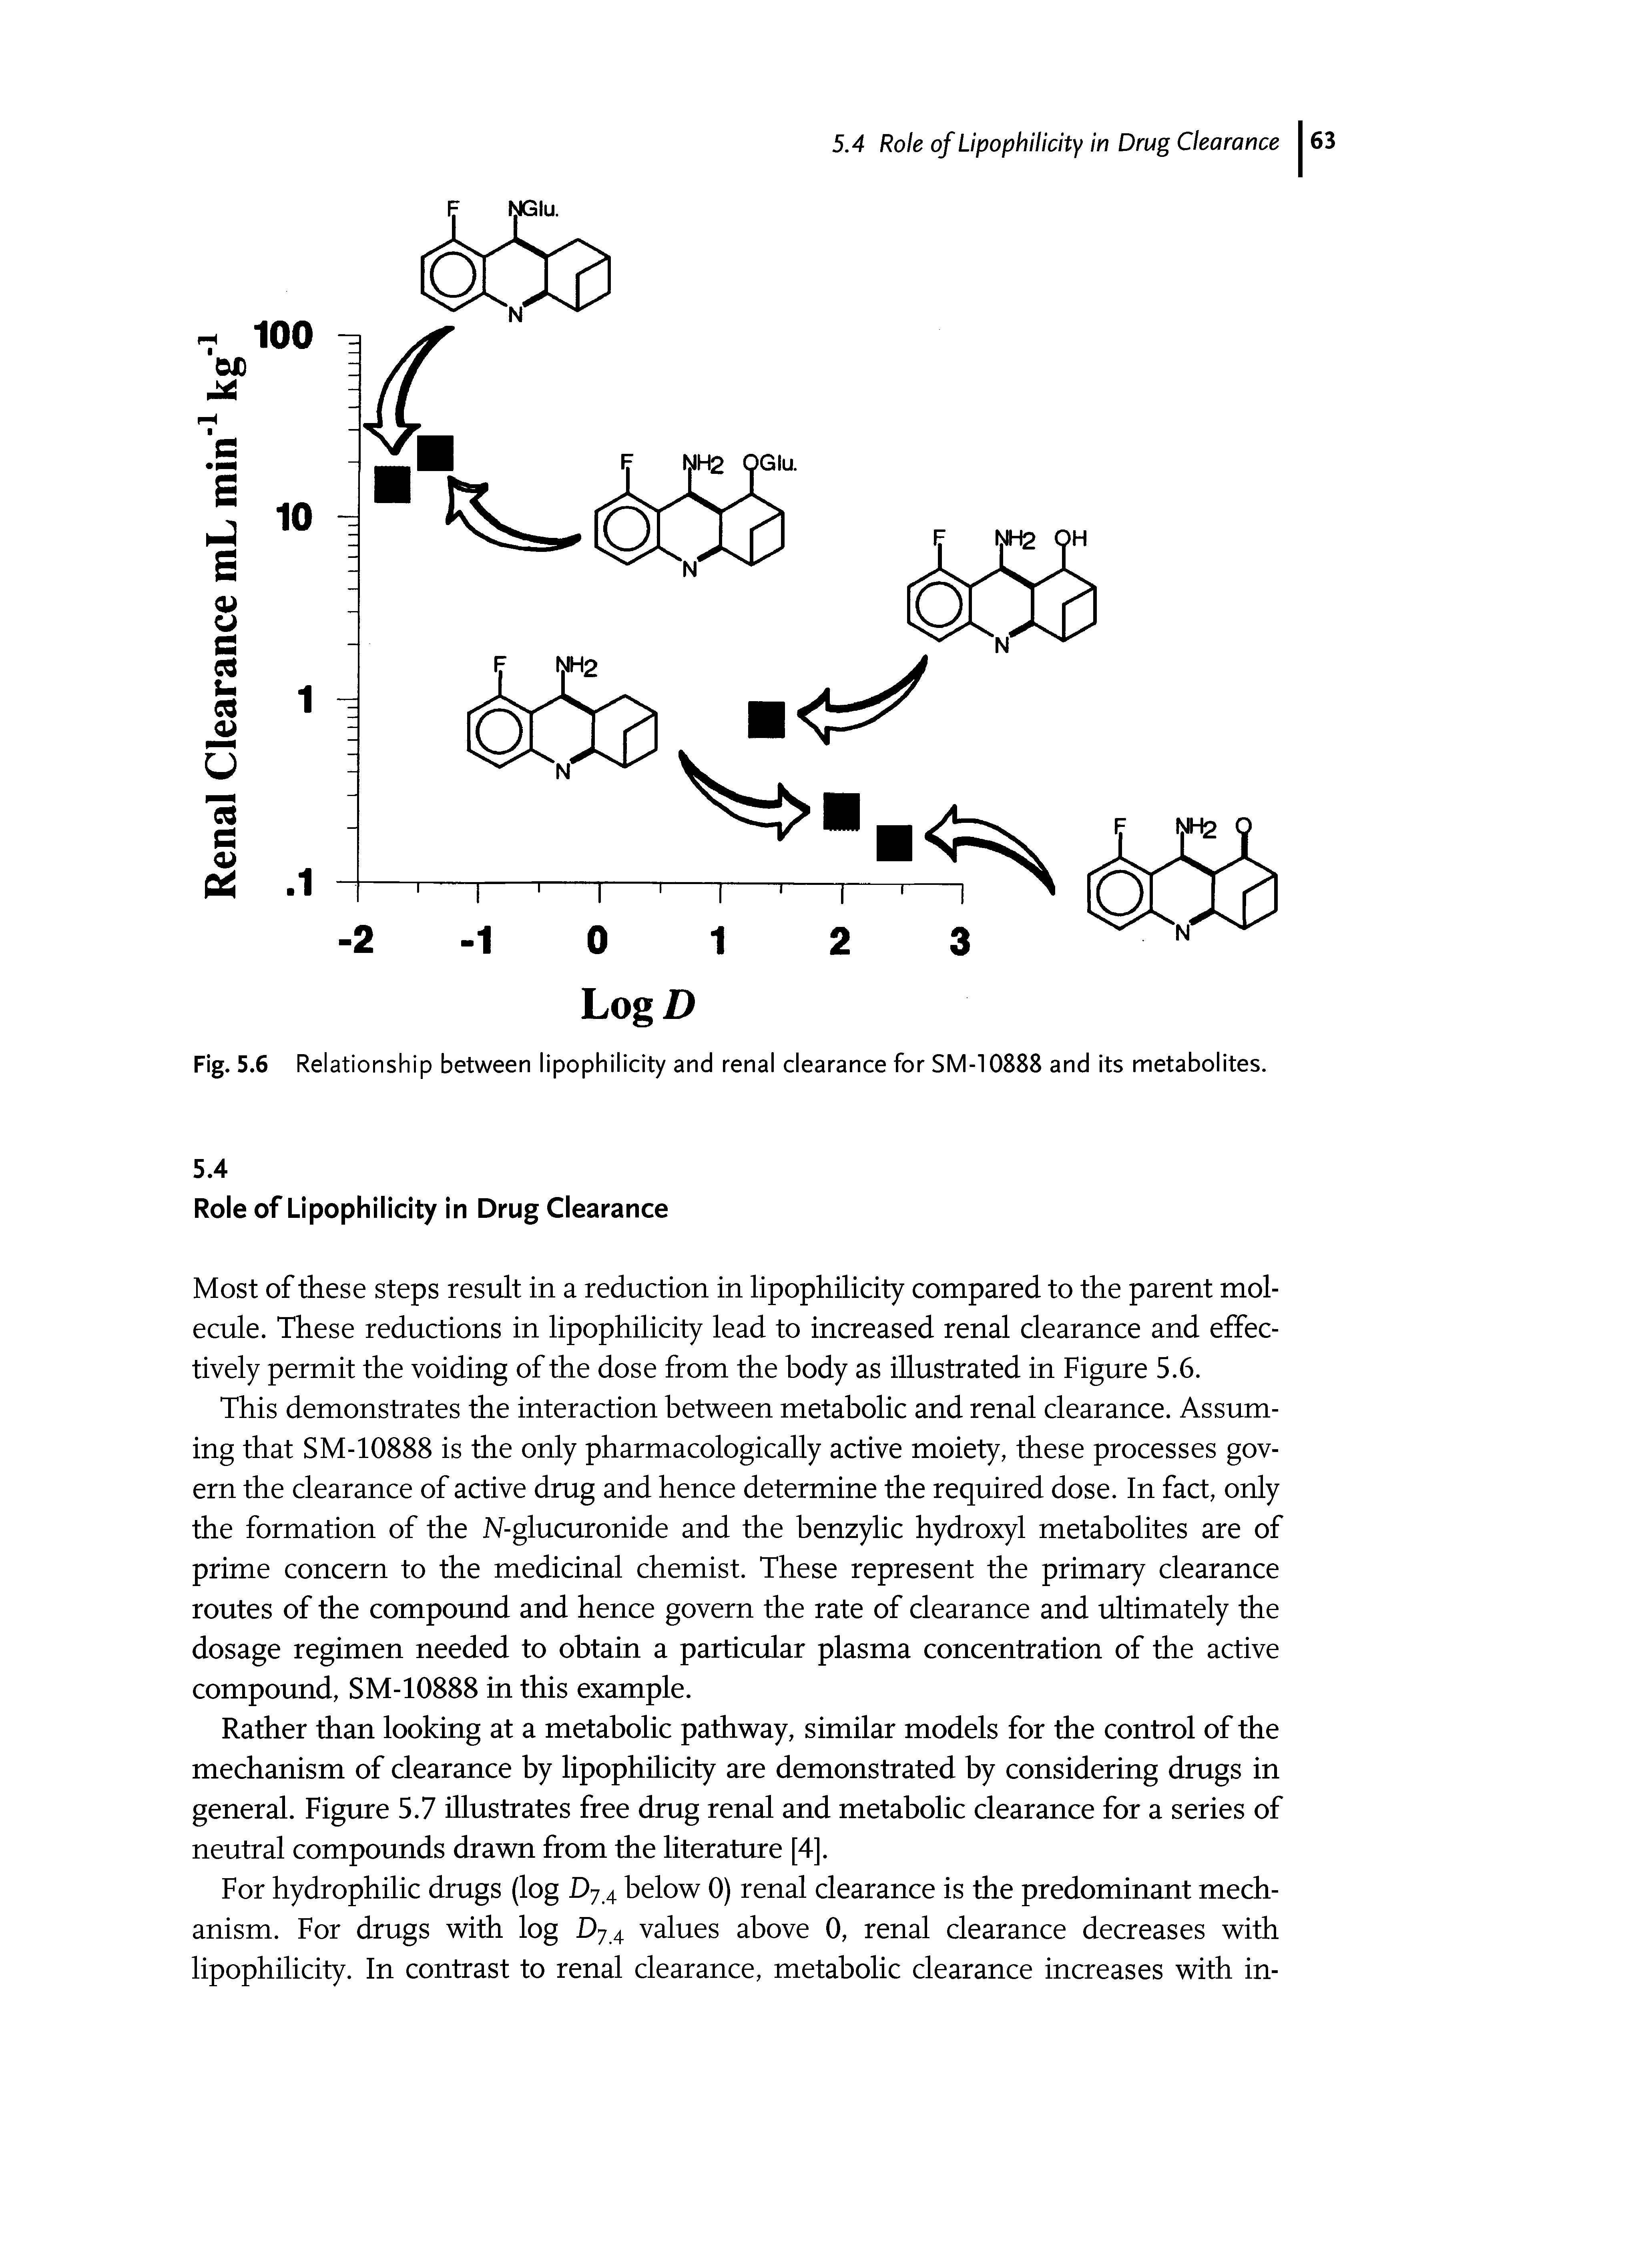 Fig. 5.6 Relationship between lipophilicity and renal clearance for SM-10888 and its metabolites.